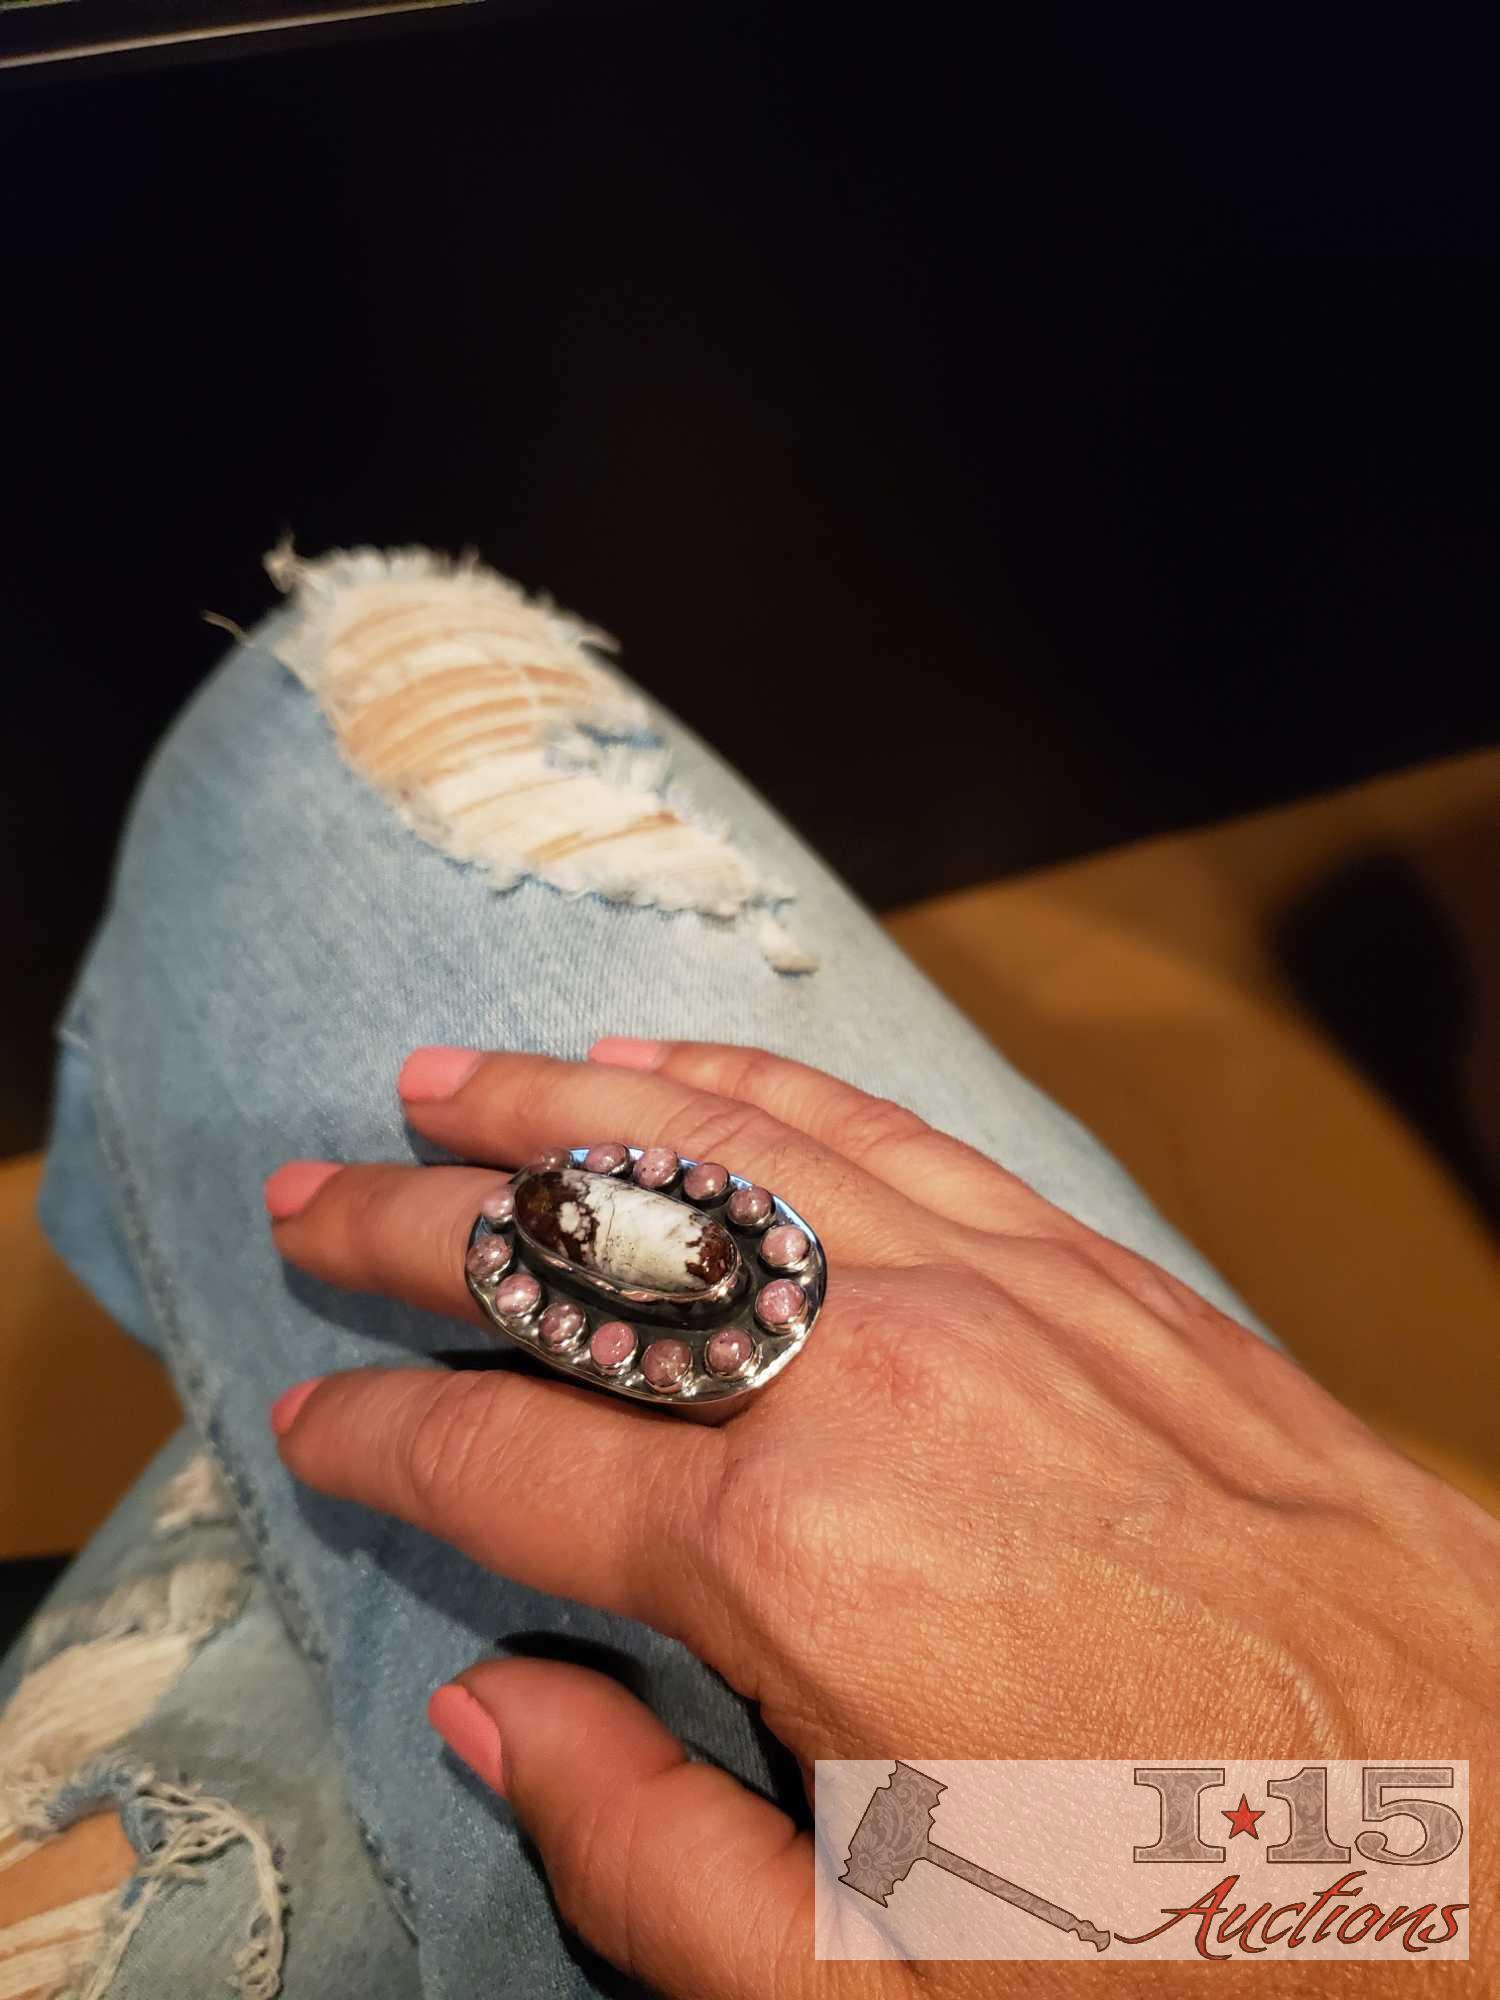 Unique Native American Sterling Ring w/Large White Bufflo Stone Surrounded by Pink Turquoise Stones